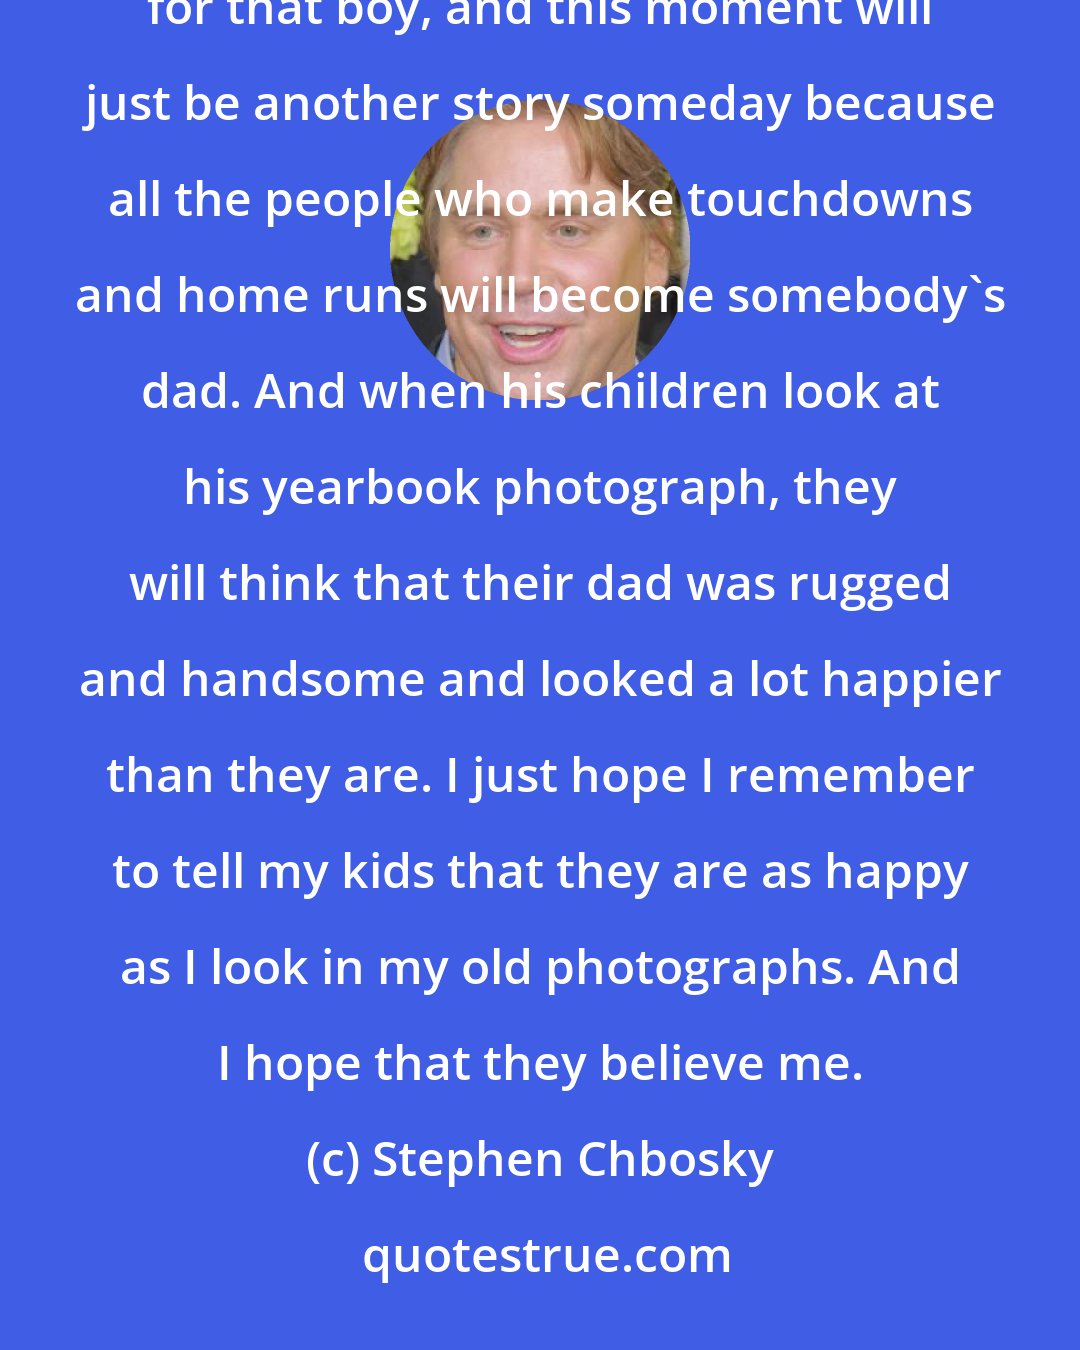 Stephen Chbosky: I look at the field, and I think about the boy who just made the touchdown. I think that these are the glory days for that boy, and this moment will just be another story someday because all the people who make touchdowns and home runs will become somebody's dad. And when his children look at his yearbook photograph, they will think that their dad was rugged and handsome and looked a lot happier than they are. I just hope I remember to tell my kids that they are as happy as I look in my old photographs. And I hope that they believe me.